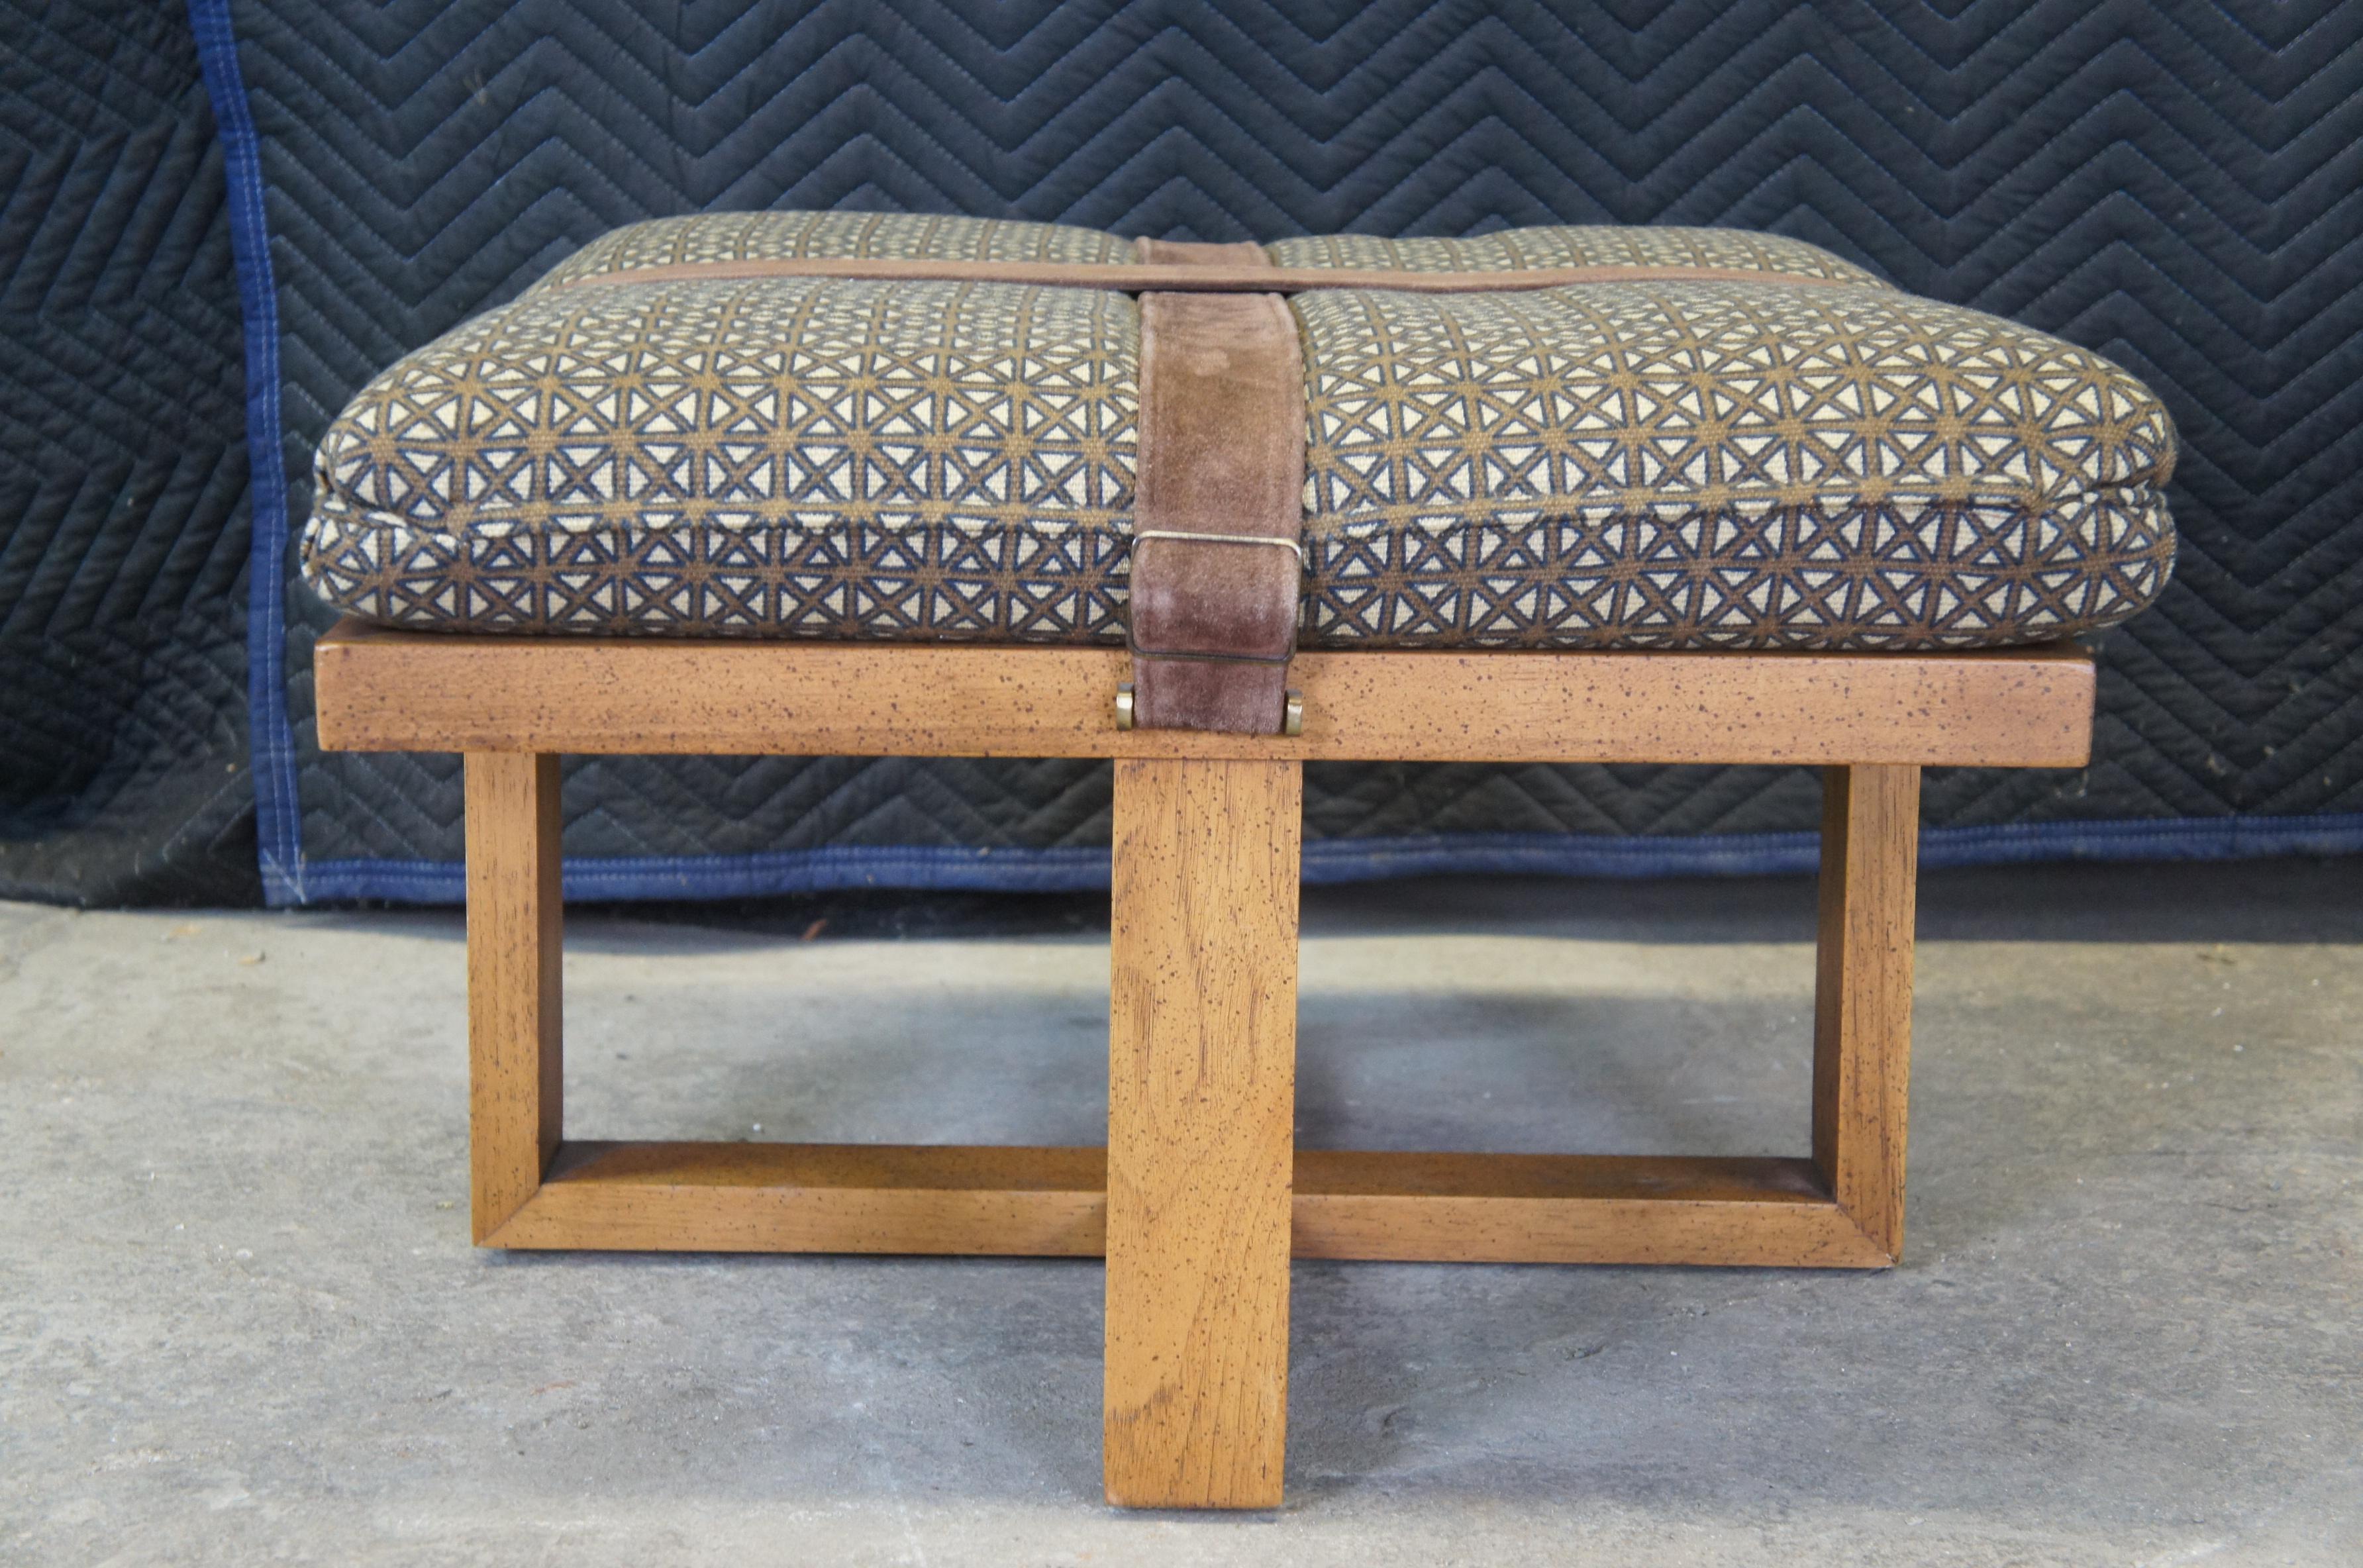 Late 20th C. Modern Oak Buckled Suede Strap Ottoman Square Foot Stool Bench MCM For Sale 3